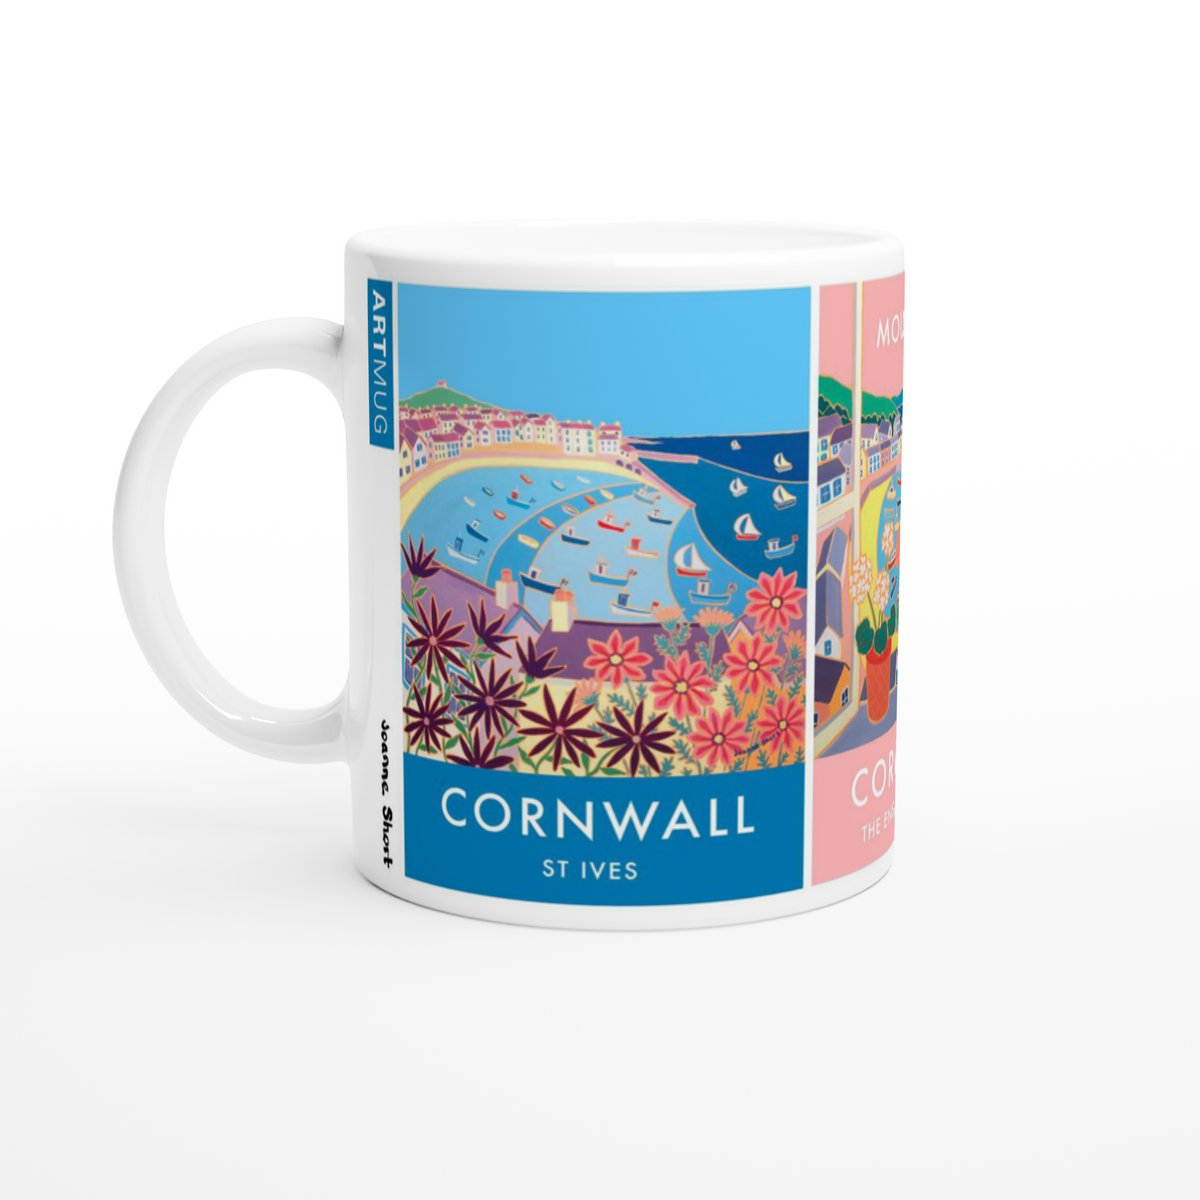 Joanne Short Ceramic Cornish Art Mug featuring St Ives and Mousehole on the Penwith Peninsula in Cornwall